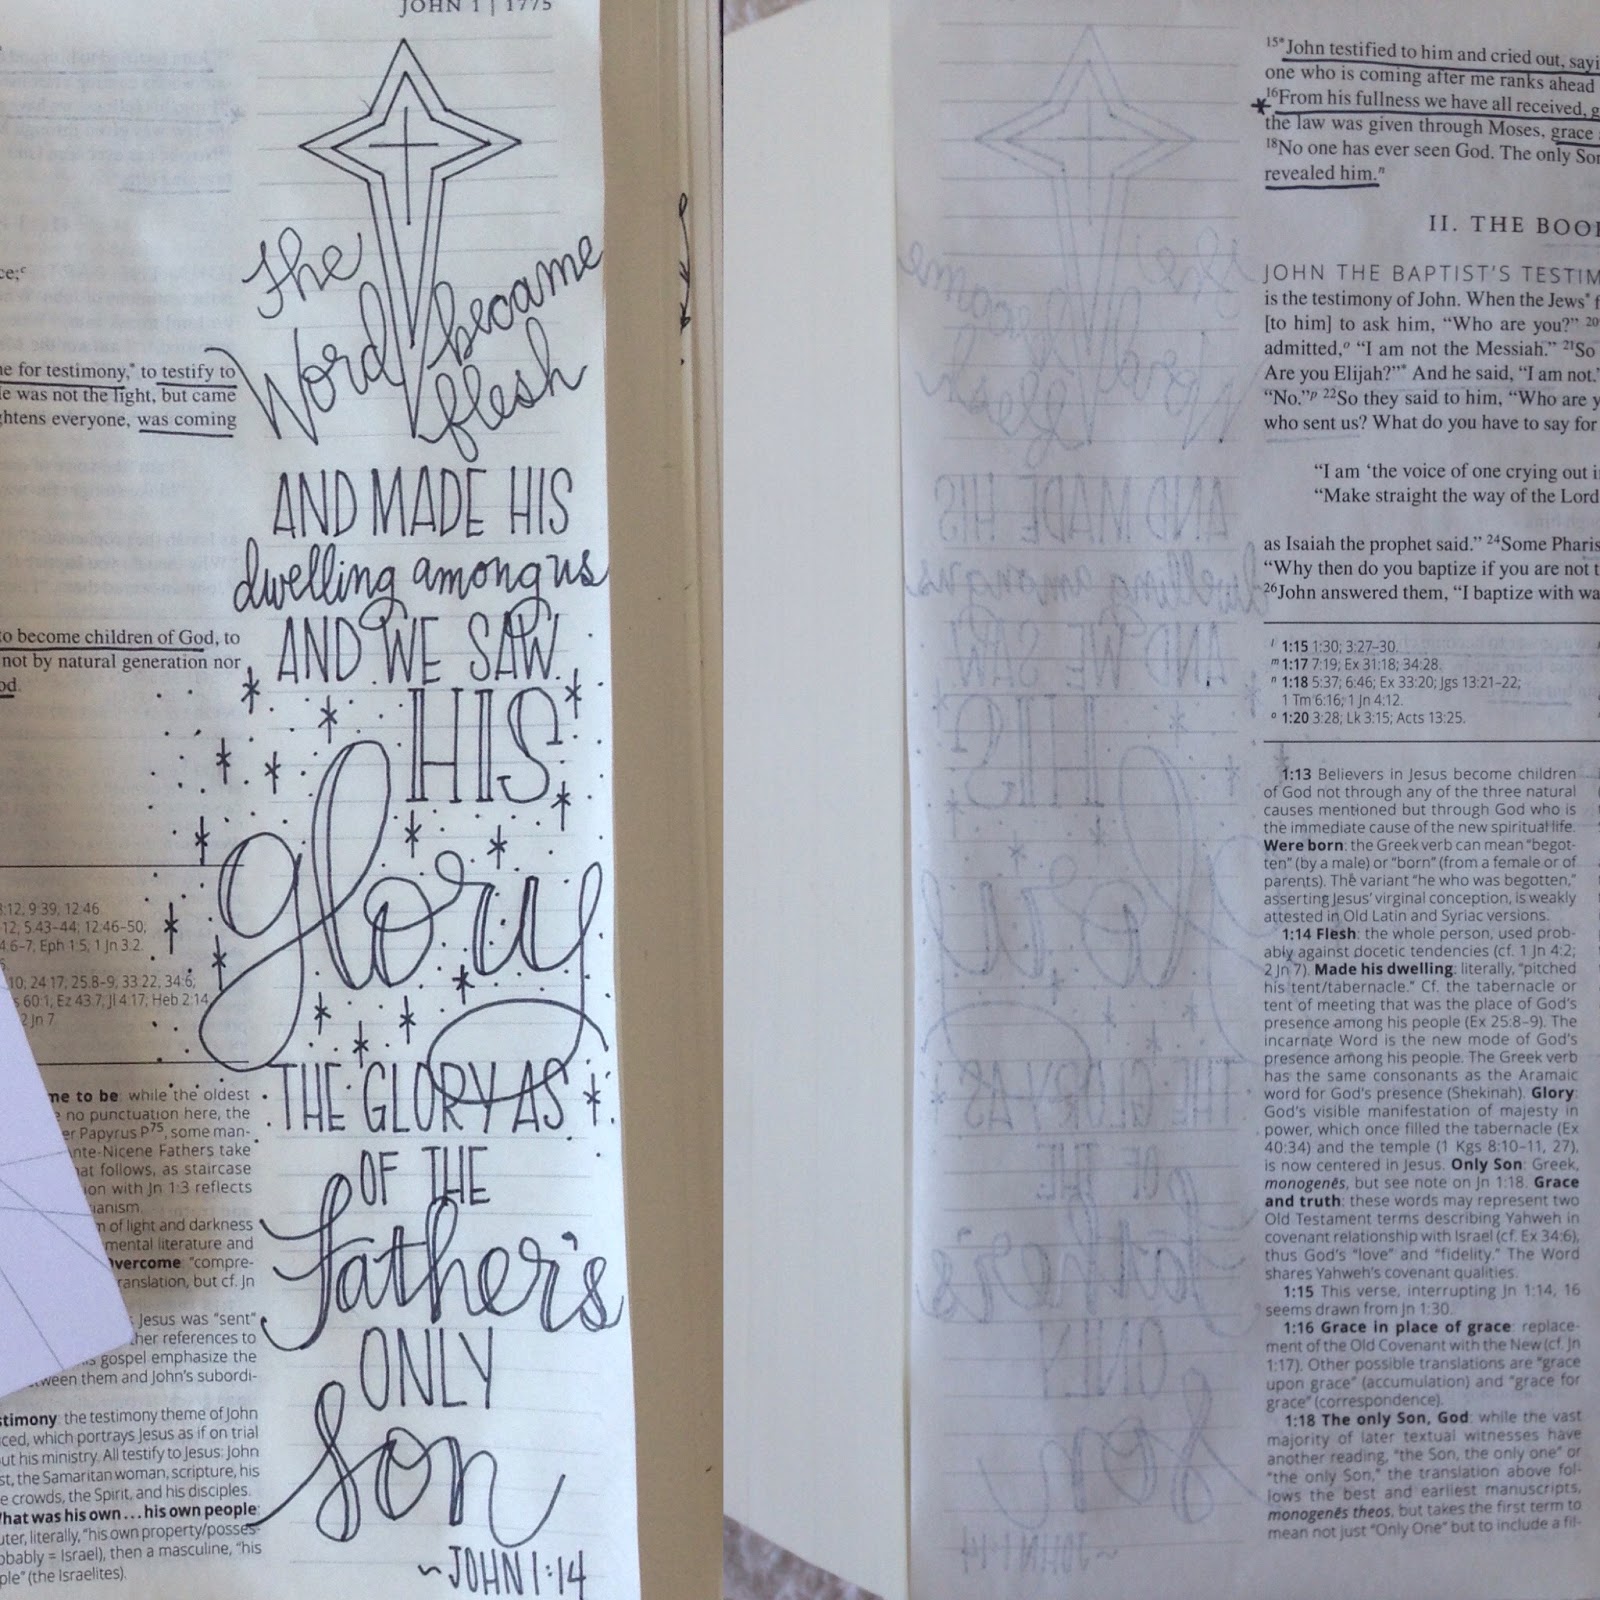 The Best Pens for Bible Journaling, Divine Creative Love